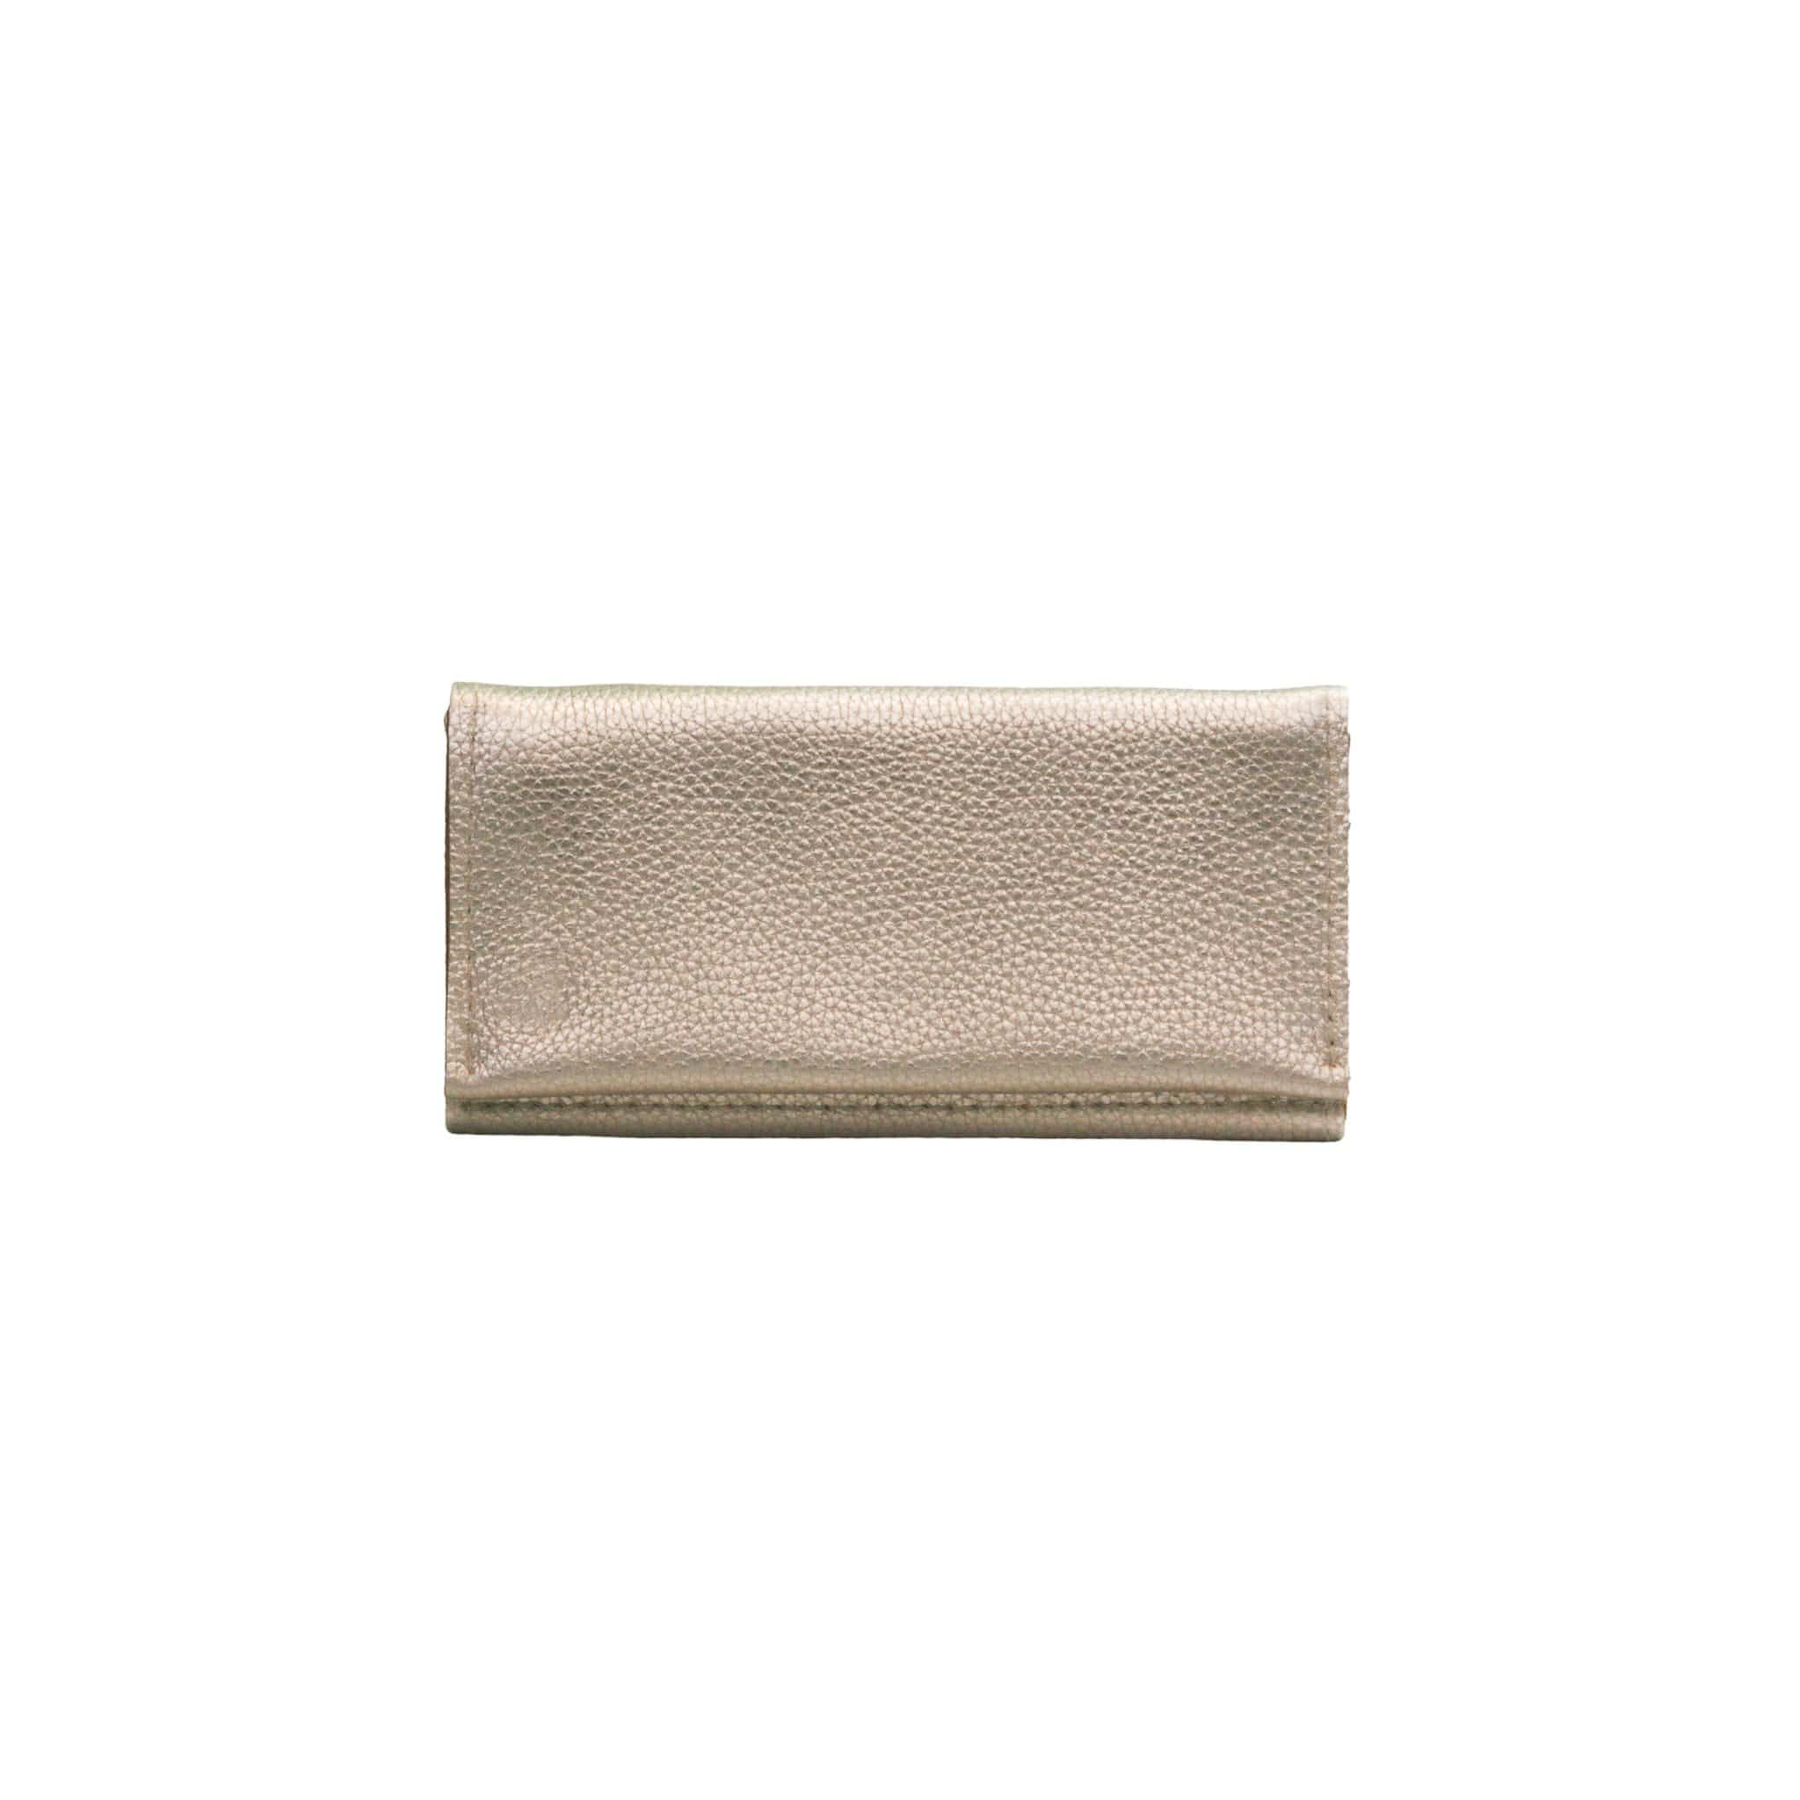 Platinum Leather Wallets for Women